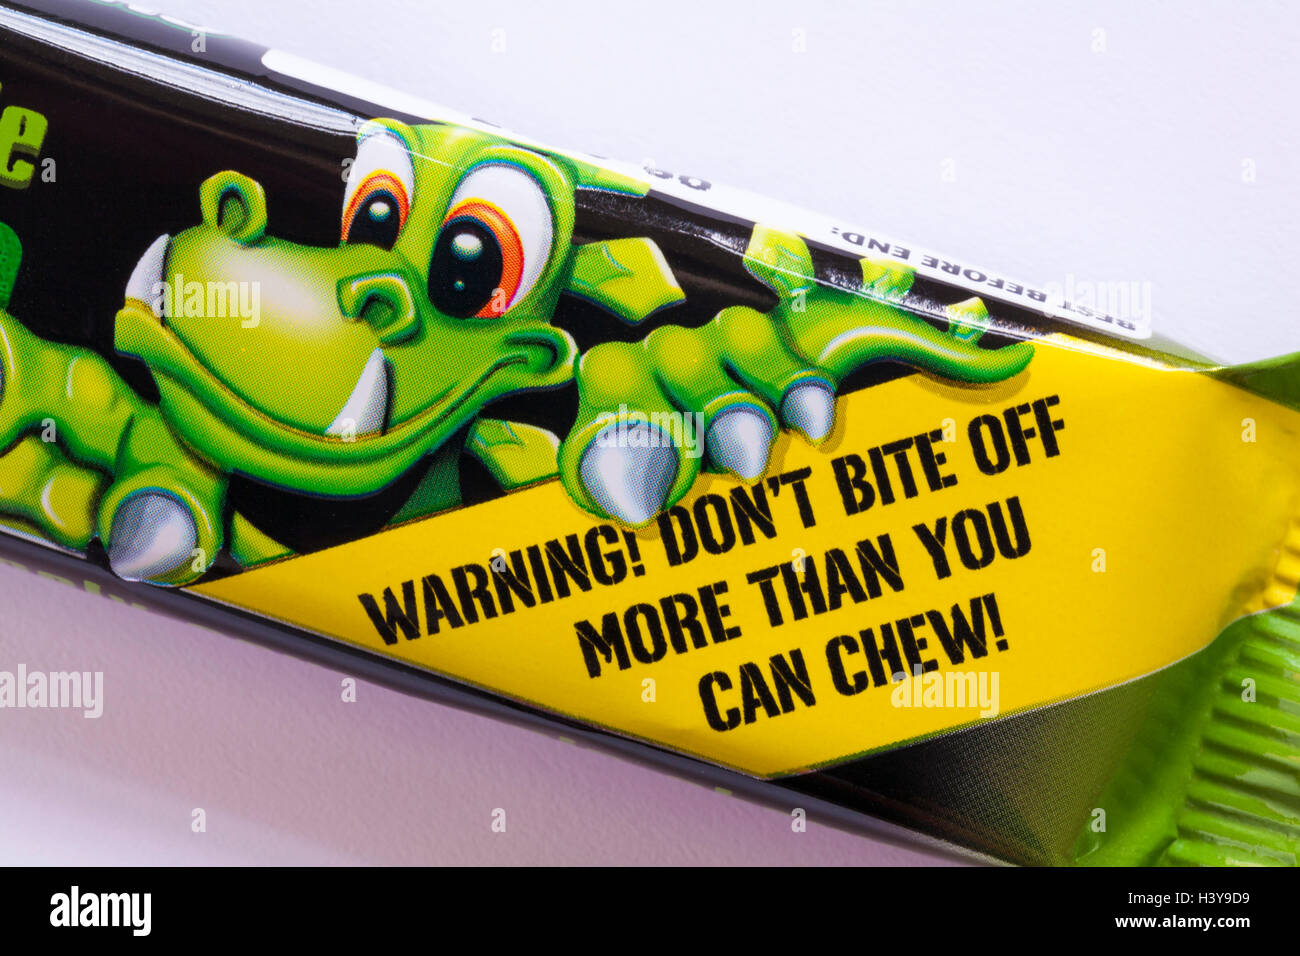 Warning don't bite off more than you can chew - detail on pack of Xtreme Chewits extremely sour apple Stock Photo